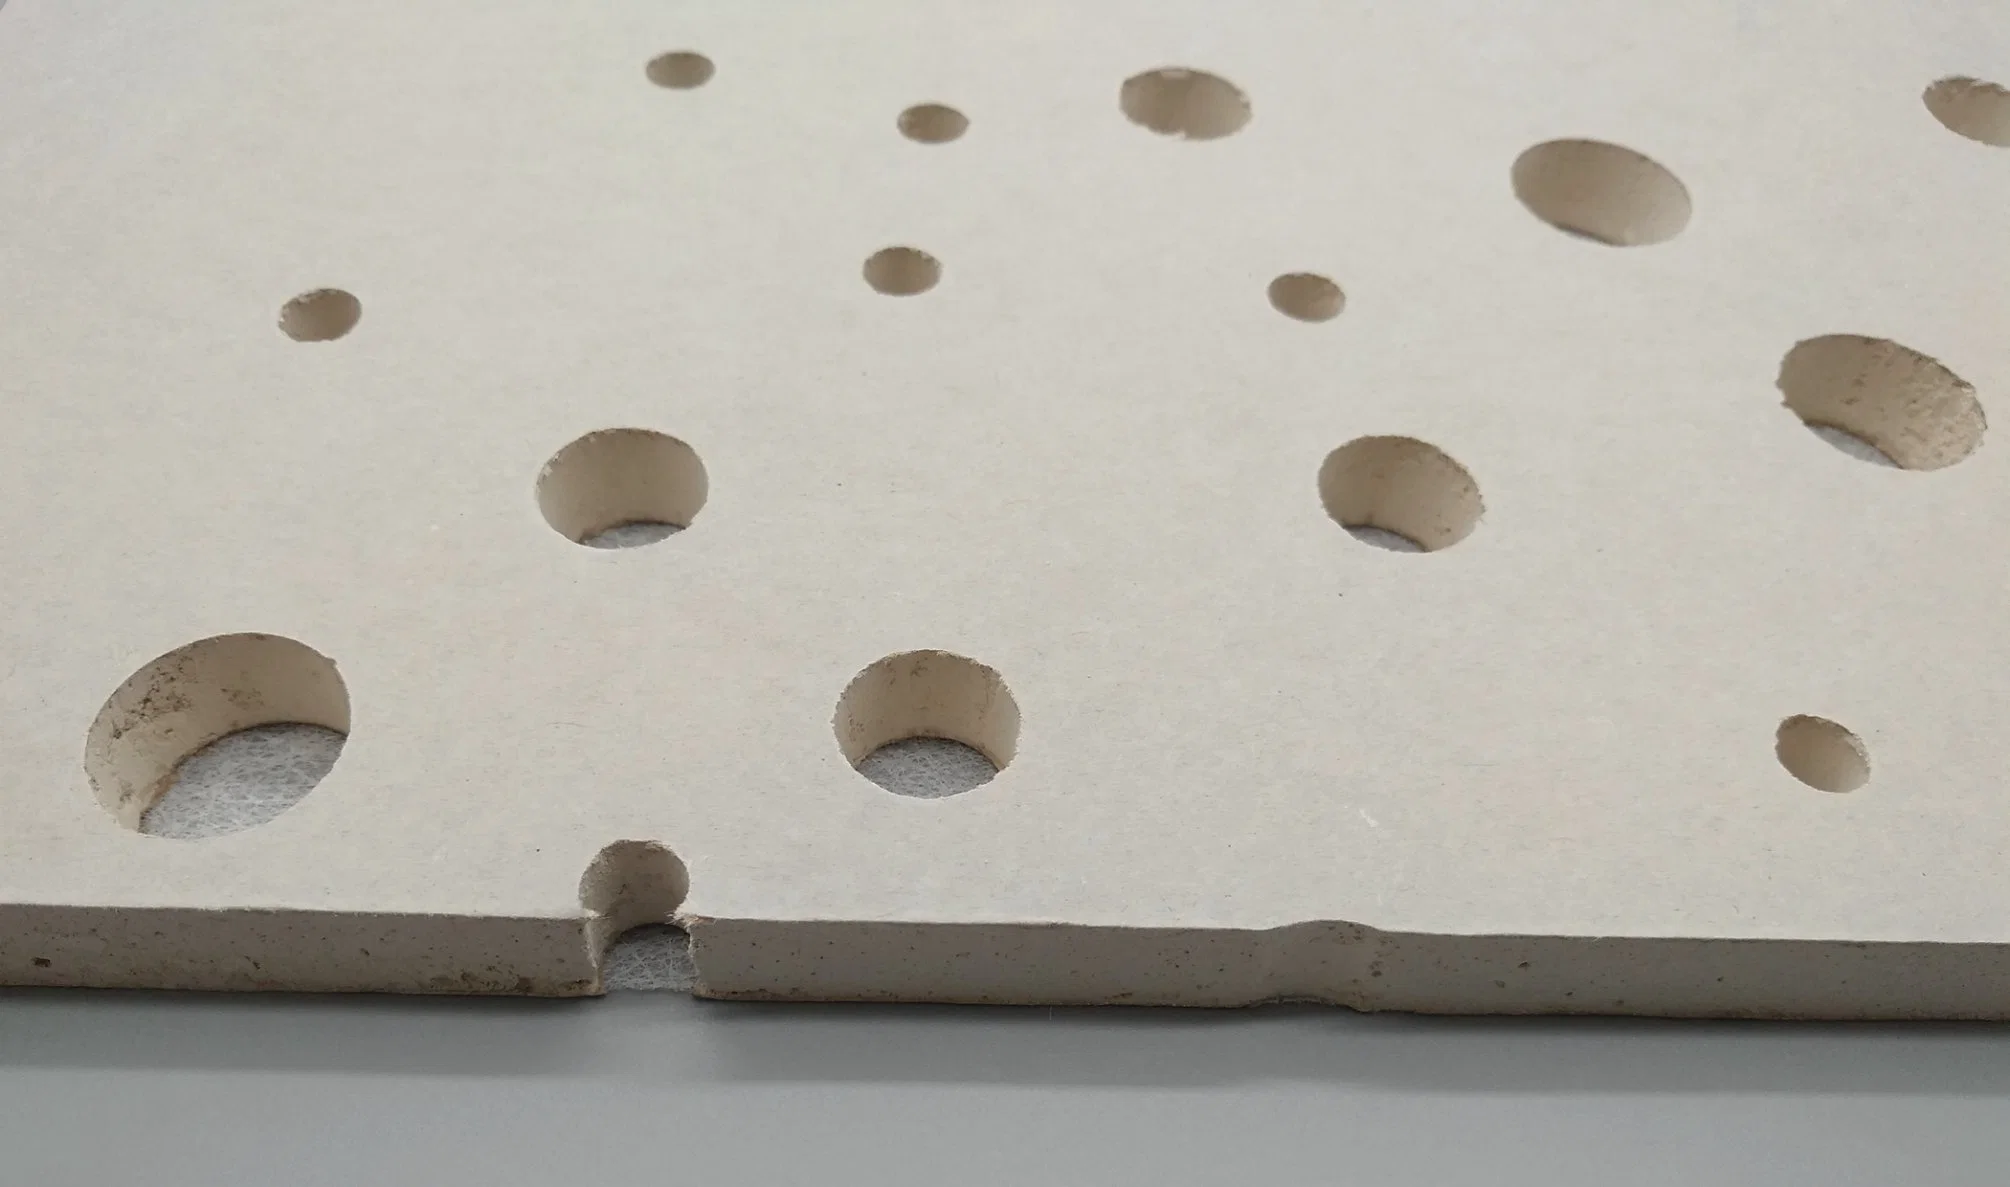 Gypsum Perforated Acoustic Board for Seamless Acoustical Ceiling and Wall System